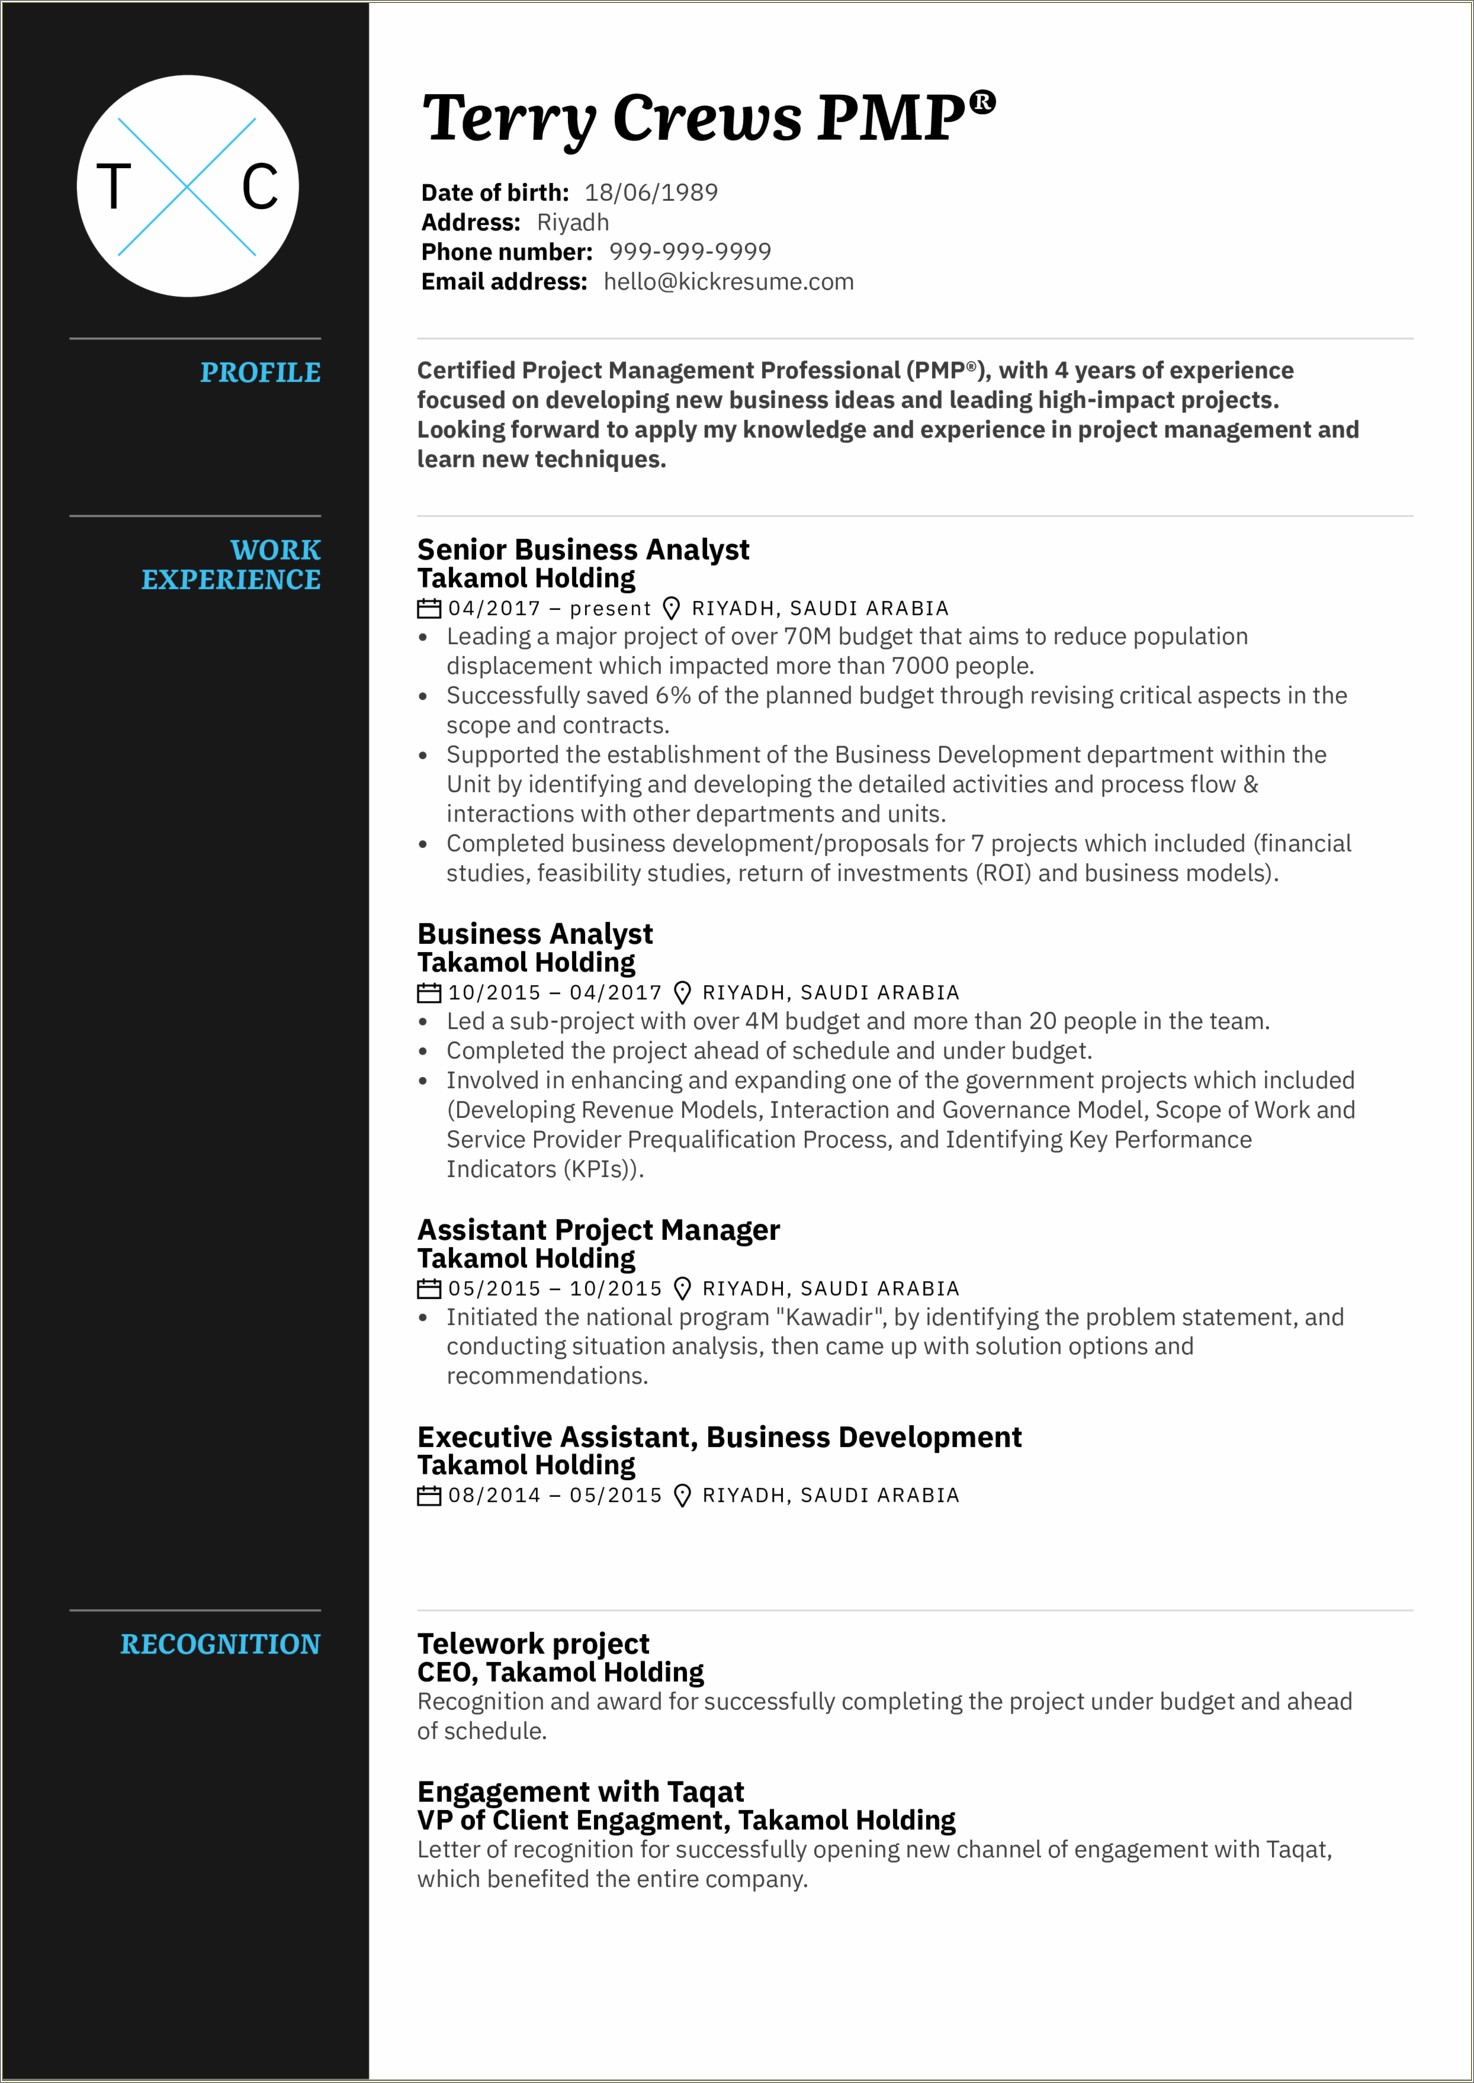 Sample Resume For It Project Manager Position